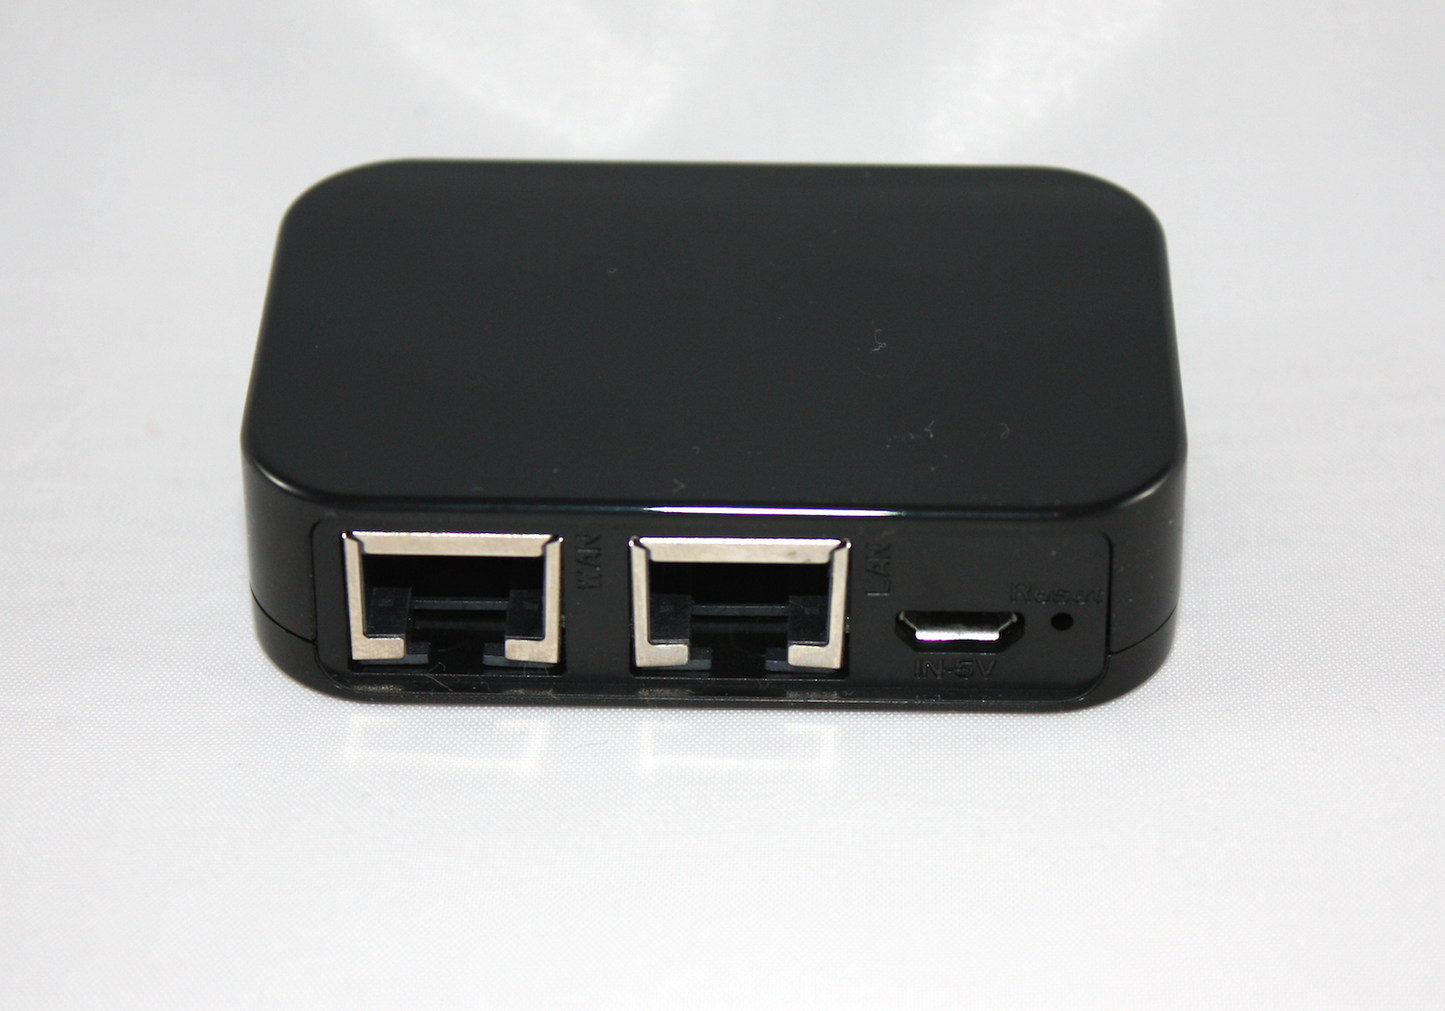 OpenWRT-Box - Mobile Access Point